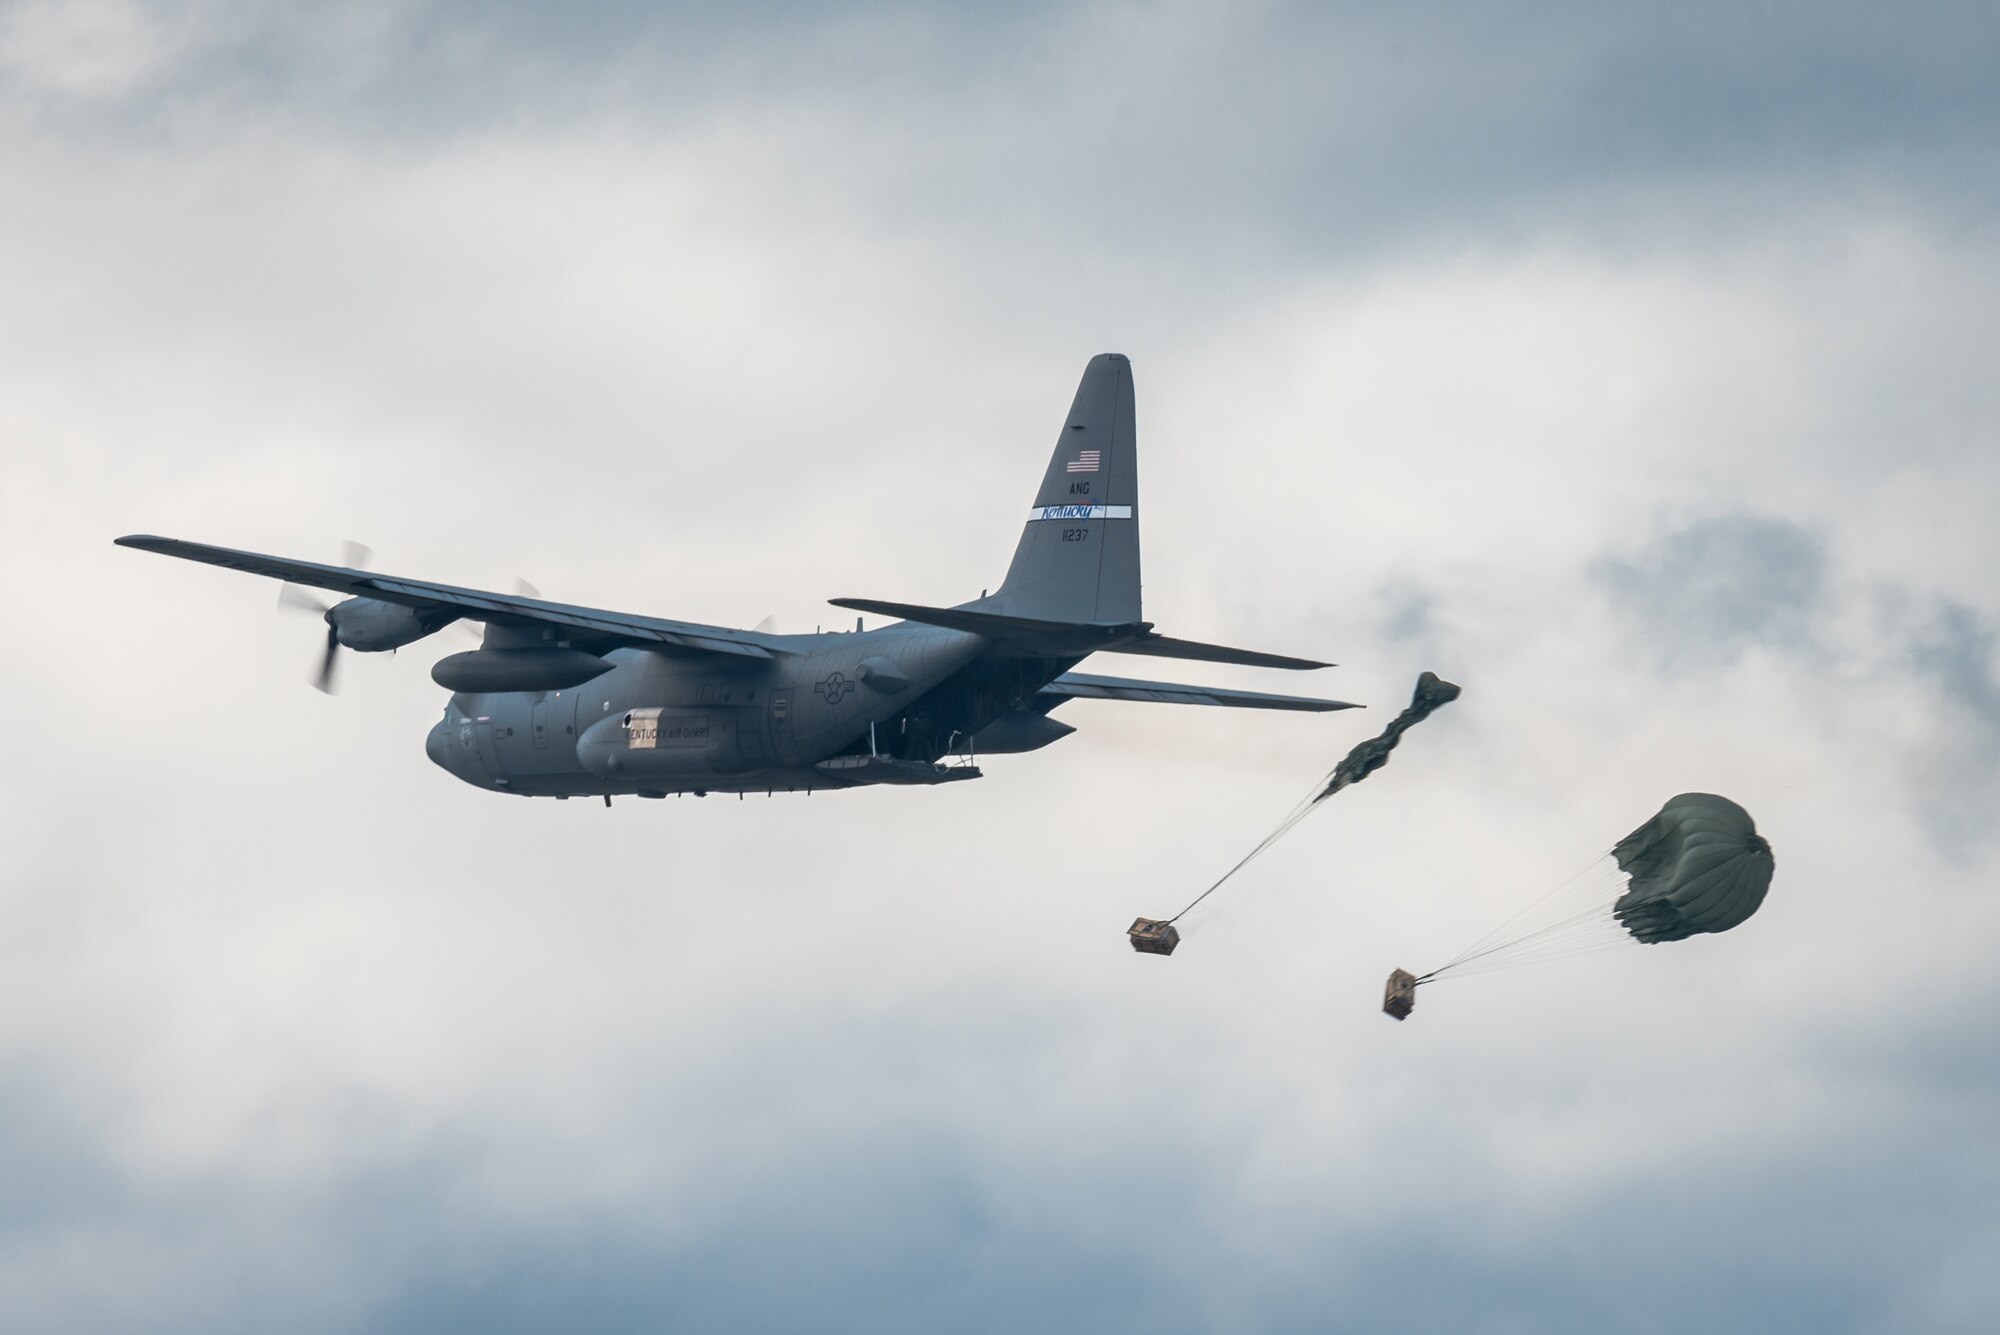 A C-130 Hercules aircraft from the Kentucky Air National Guard’s 123rd Airlift Wing air-drops two bundles of cargo in the Ohio River during the Thunder Over Louisville air show in Louisville, Ky., April 22, 2017. The annual event has grown to become the largest single-day air show in the nation. (U.S. Air National Guard photo by Lt. Col. Dale Greer)